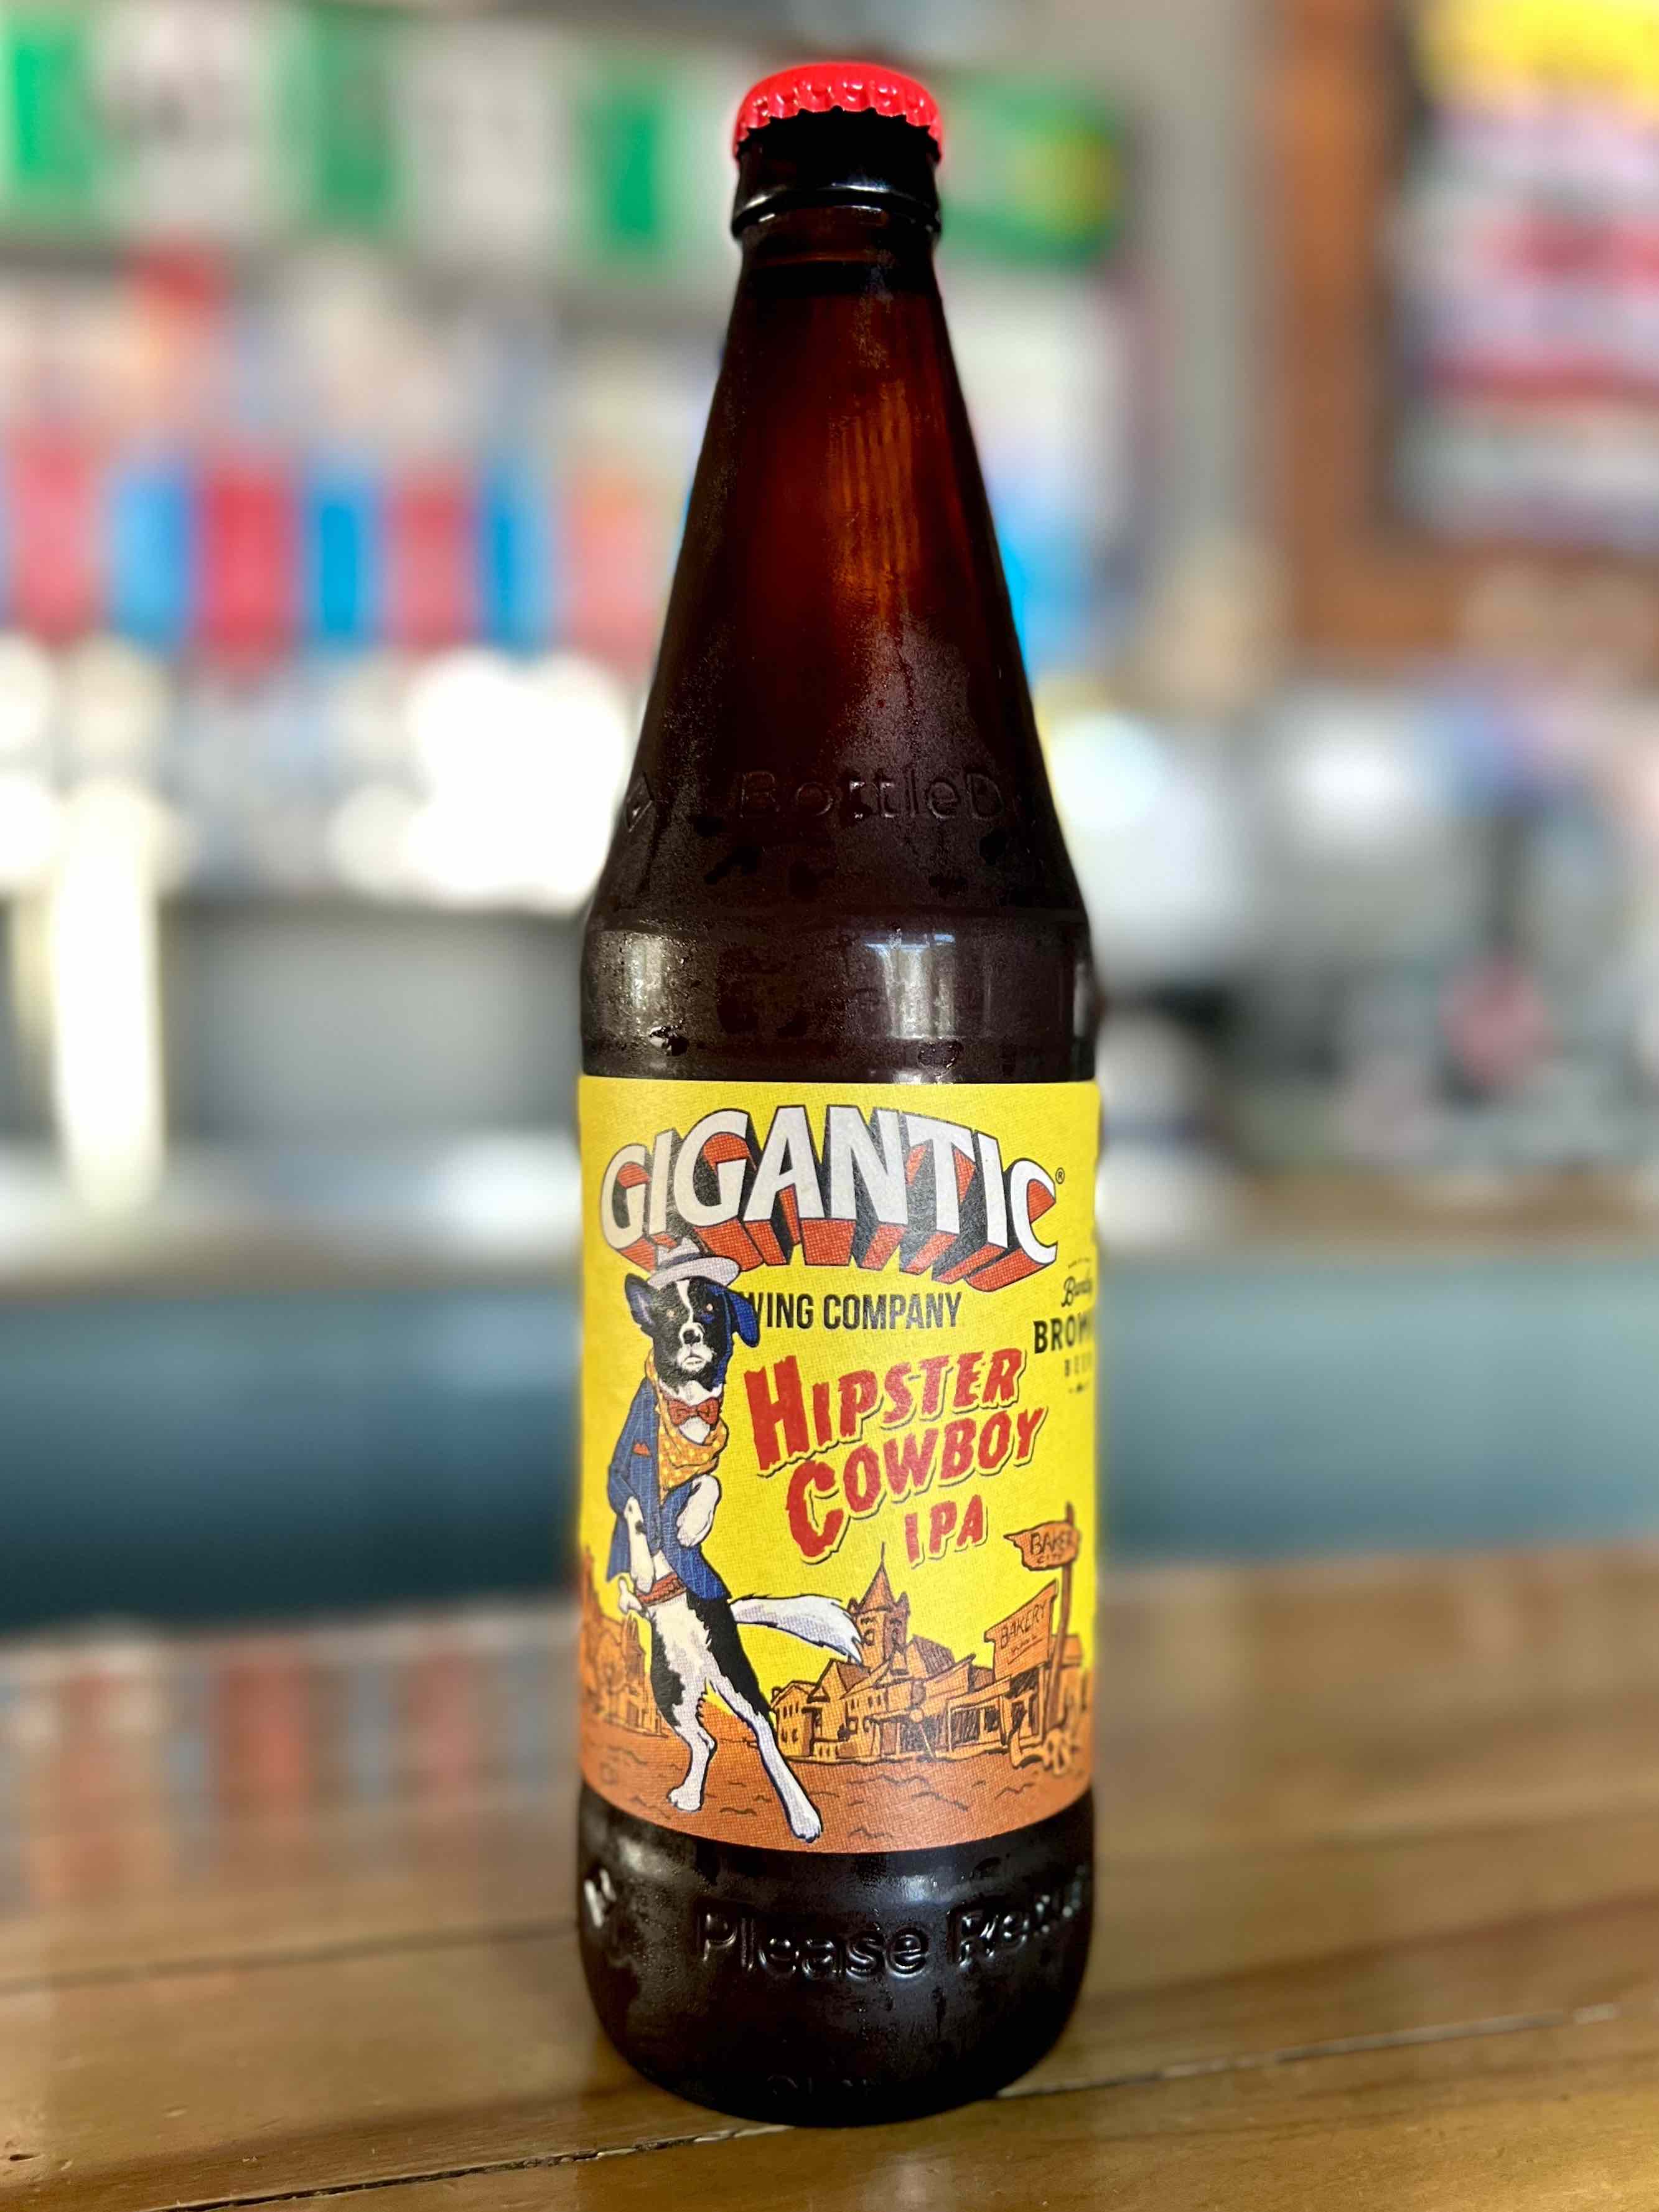 image of the bottle of Hipster Cowboy IPA courtesy of Gigantic Brewing